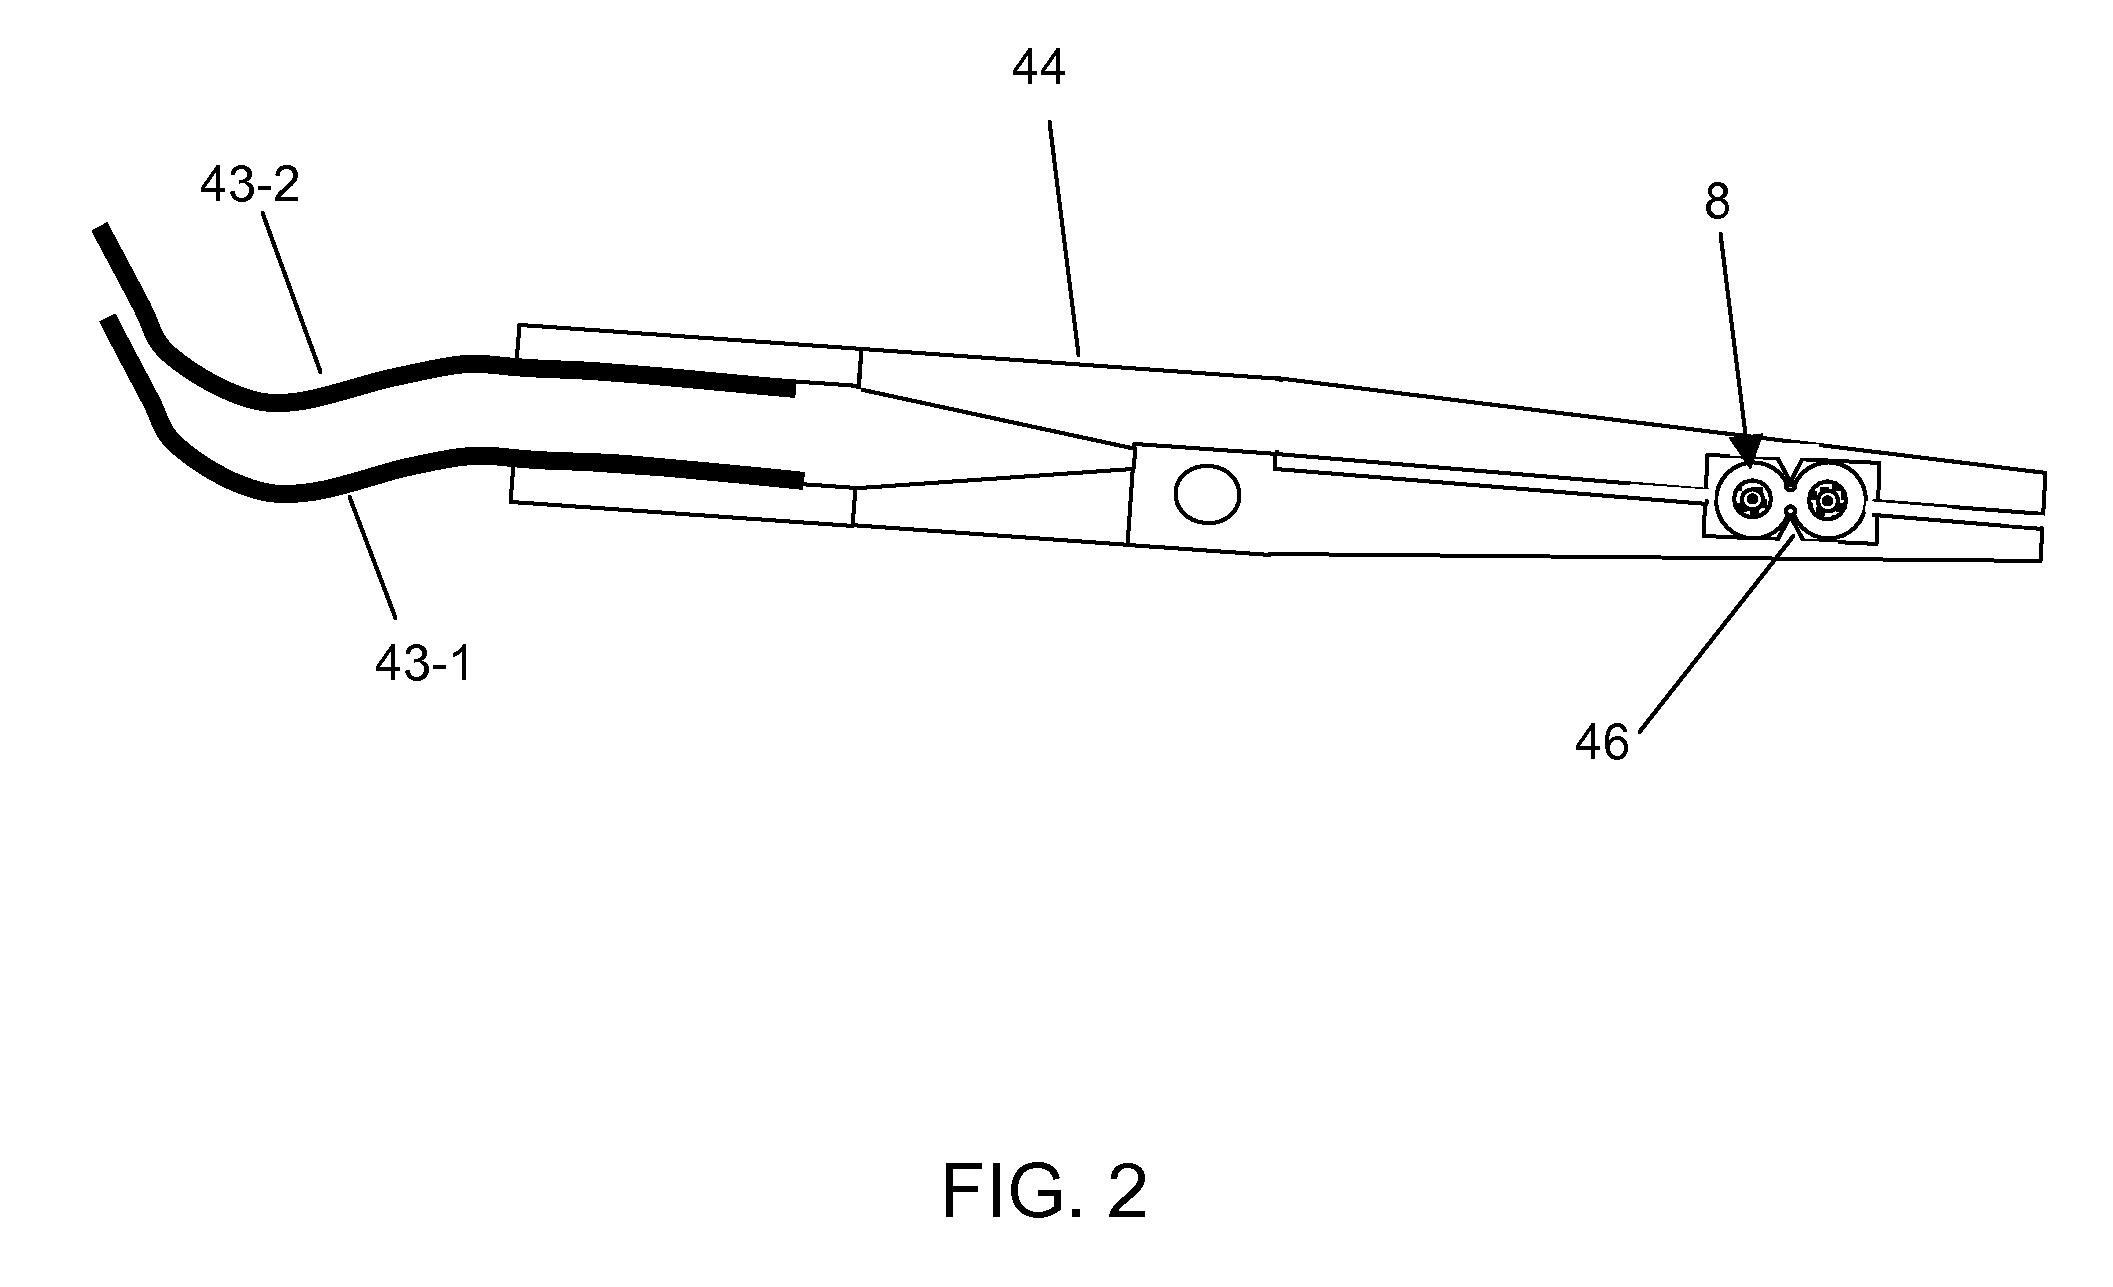 Electrically Traceable and Identifiable Fiber Optic Cables and Connectors